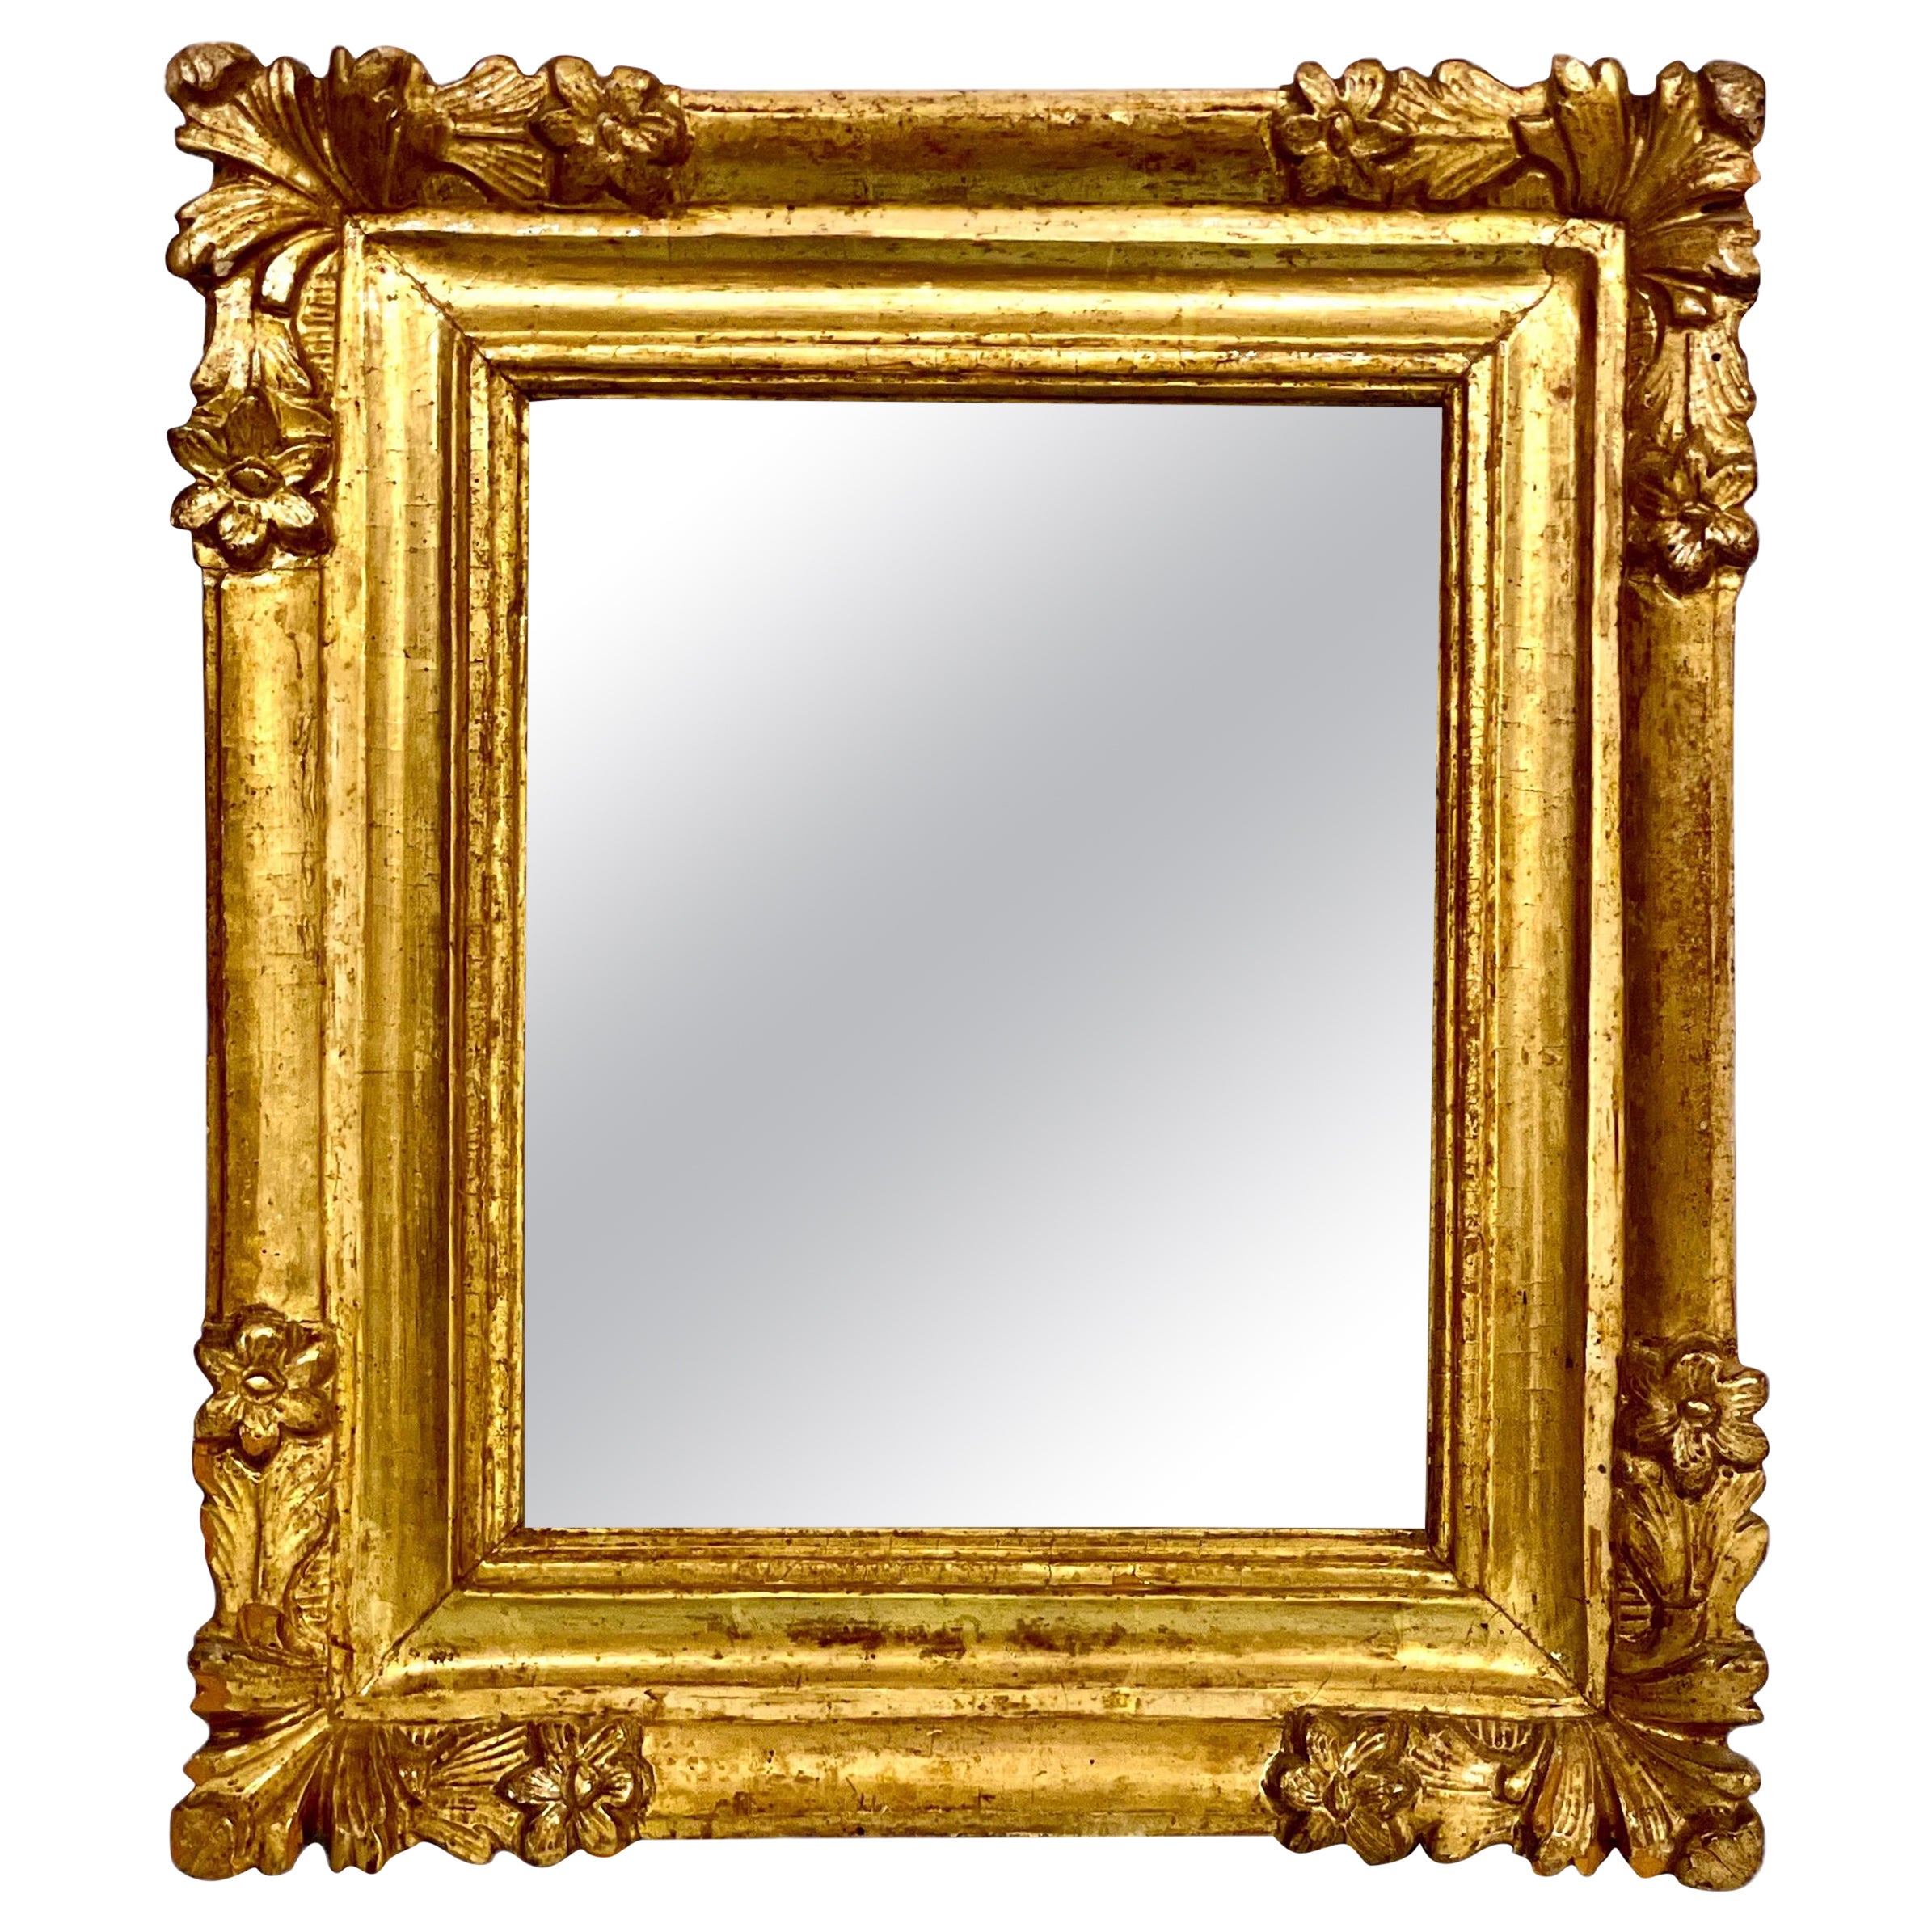 Rectangular Mirror with Acanthus Design on Corners For Sale